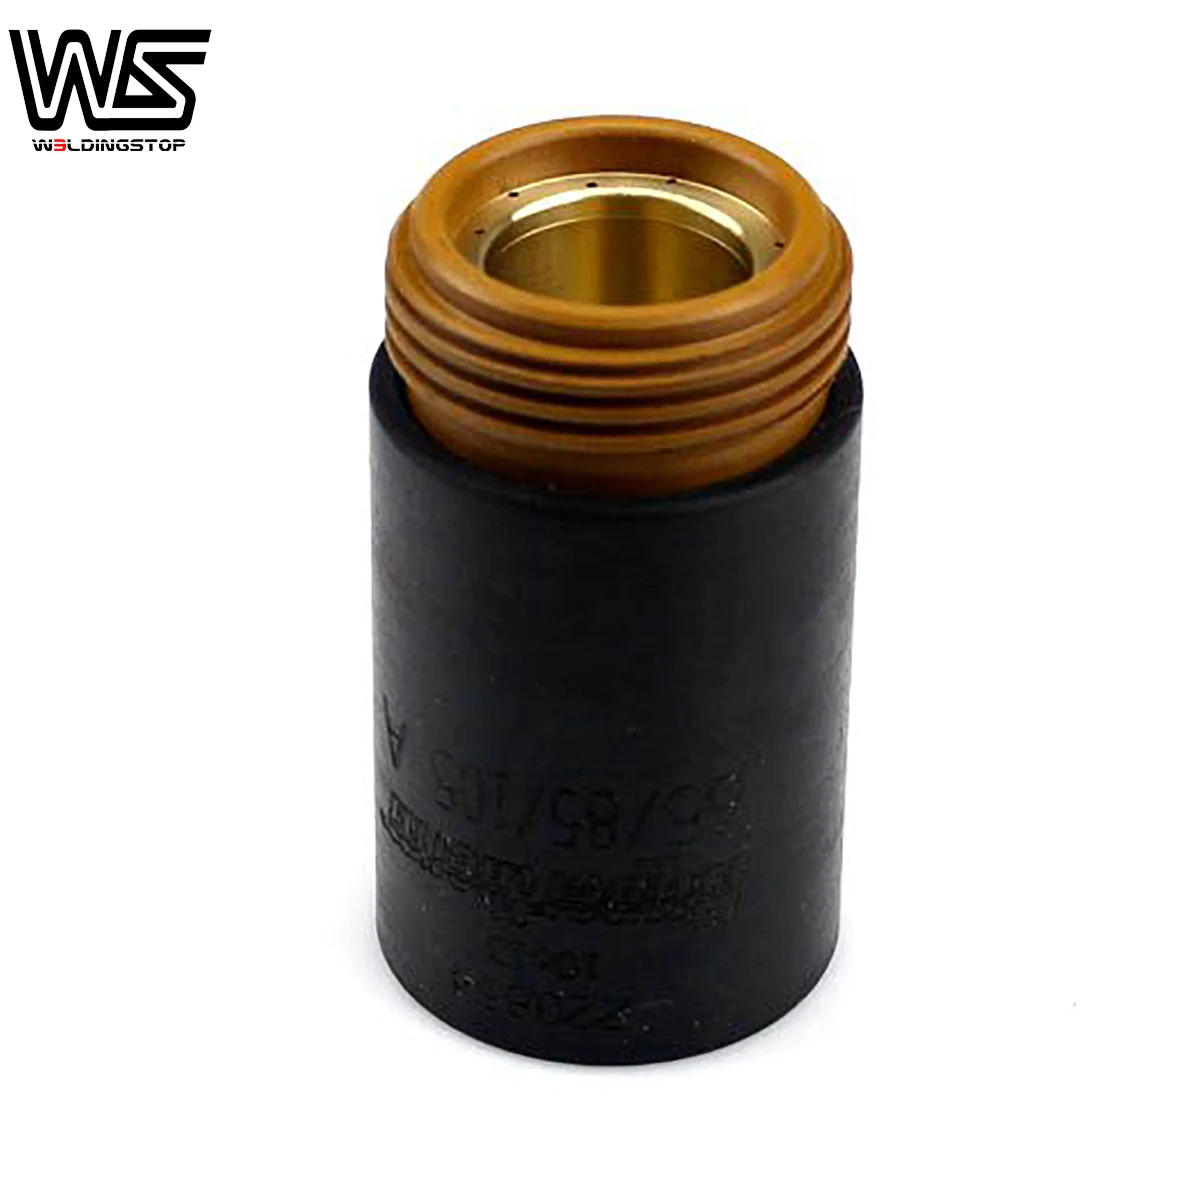 Genuine plasma torch retainning cap 220854 fits in 65/85/105 air plasma Cutting Torch Consumables replacement